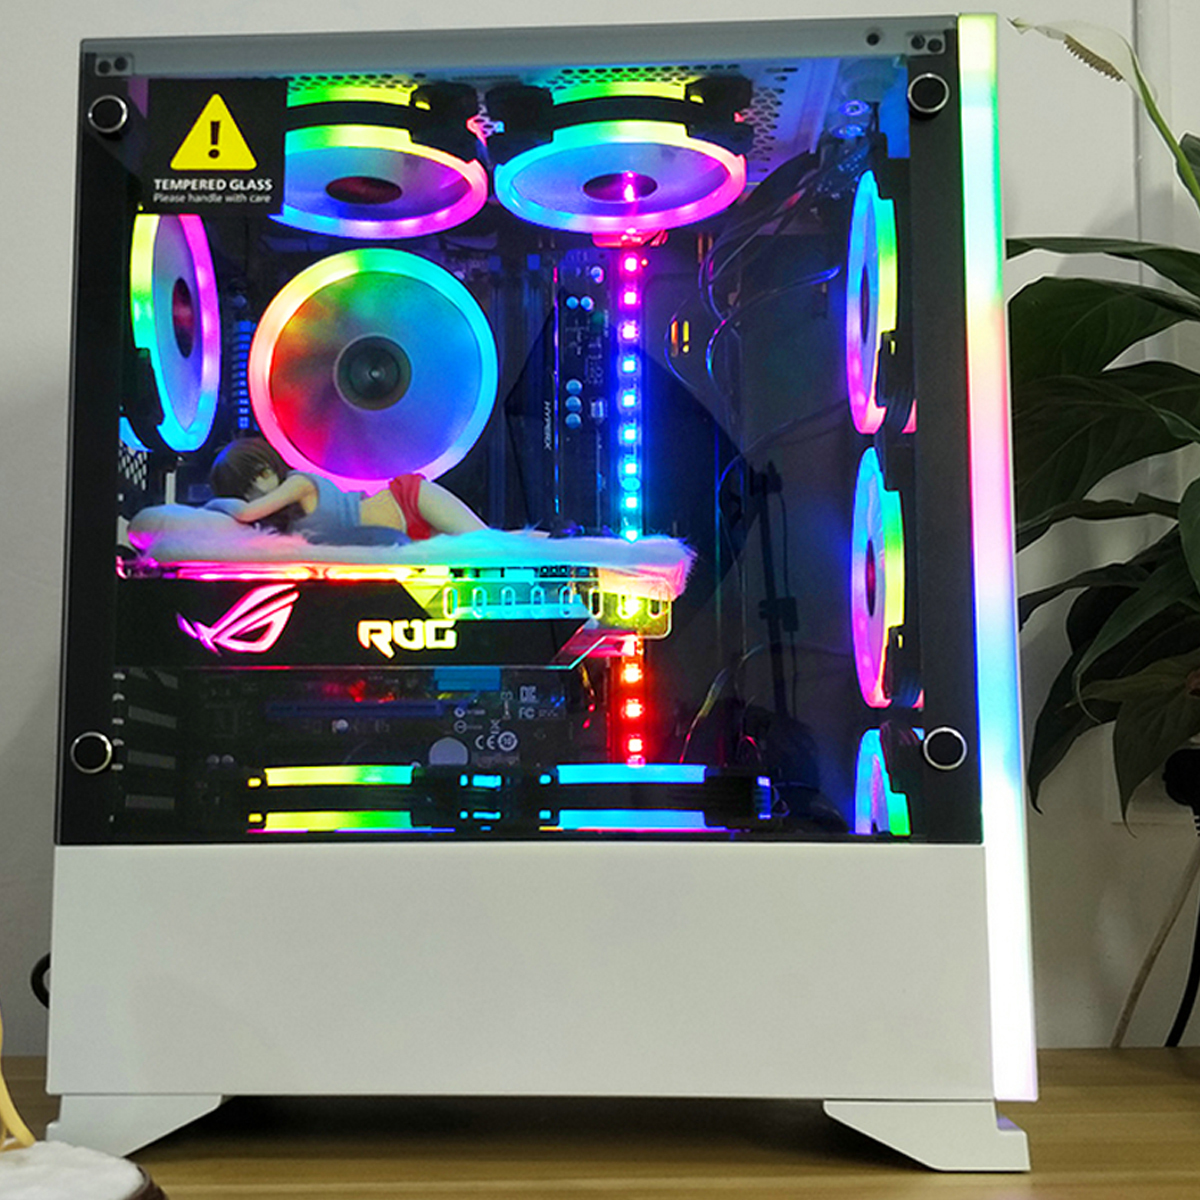 120mm-Computer-PC-Cooler-Cooling-Fan-RGB-LED-Multicolor-mode-Quiet-Chassis-Fan-With-Controller-1940489-4